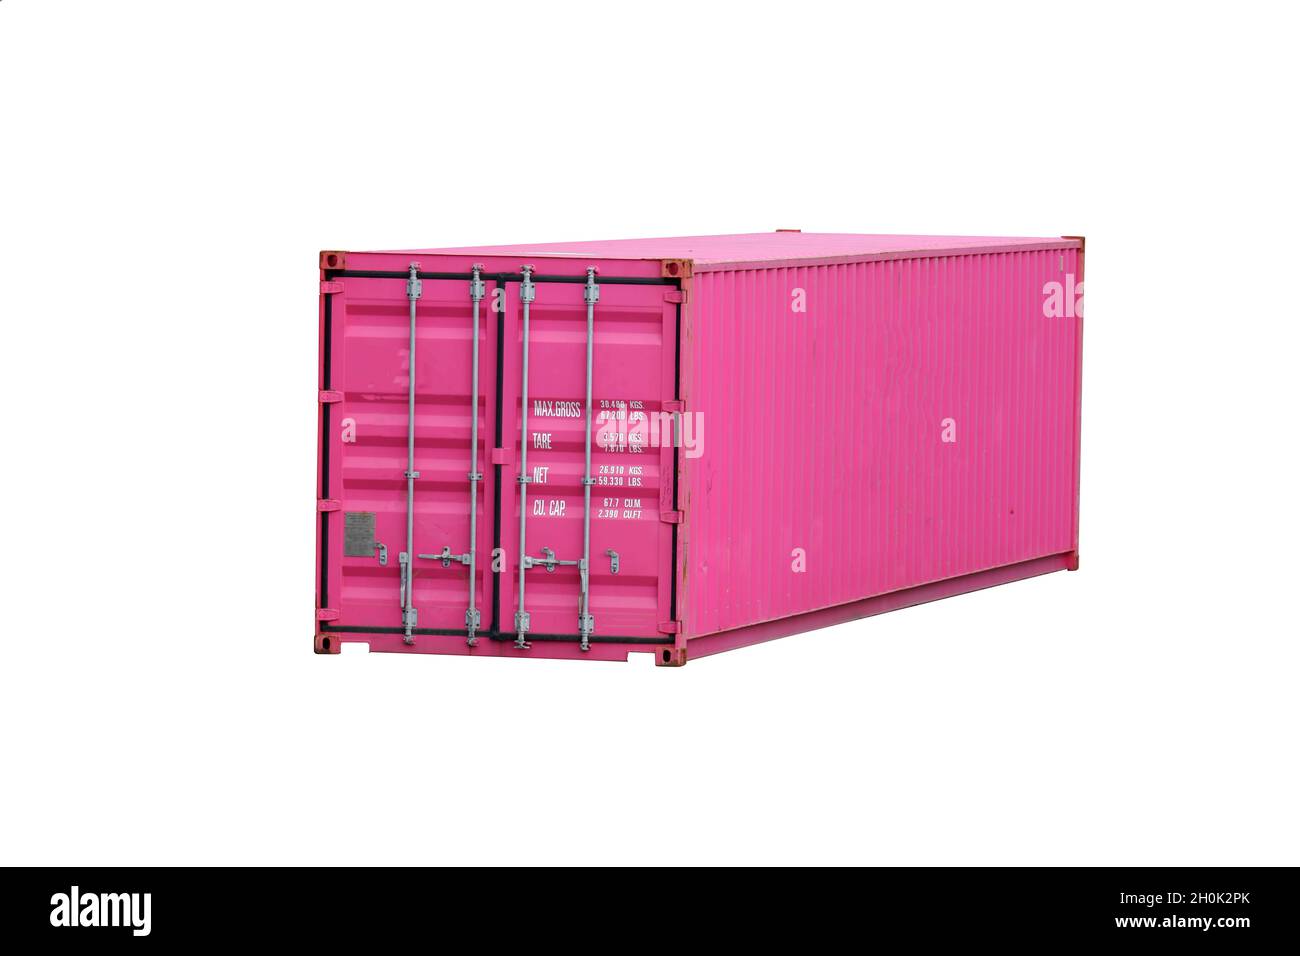 https://c8.alamy.com/comp/2H0K2PK/pink-shipping-container-for-transportation-and-transportation-on-white-background-2H0K2PK.jpg